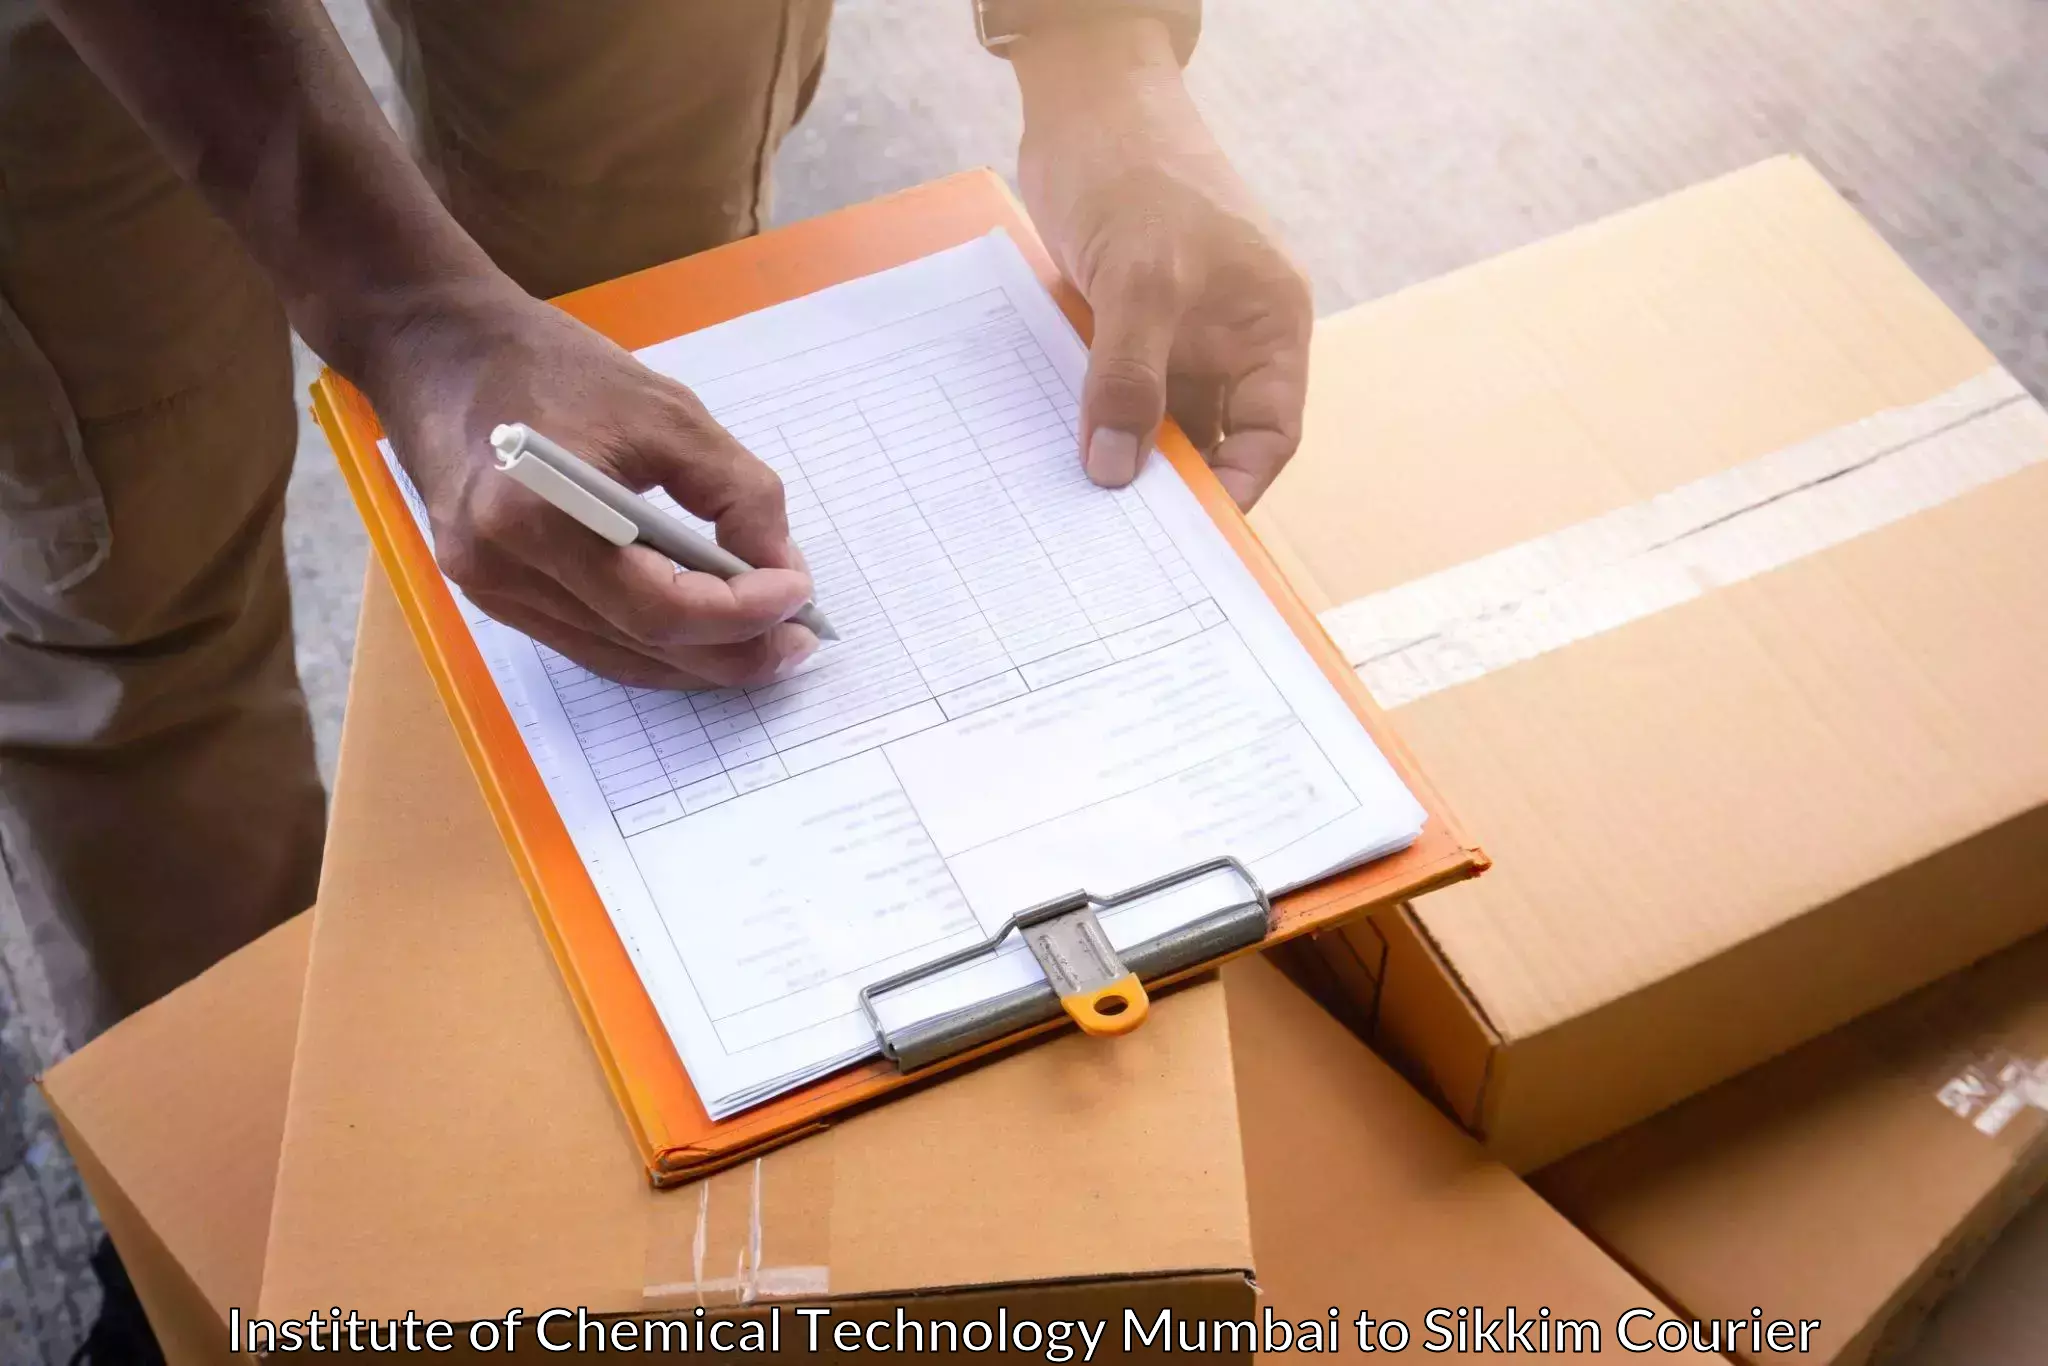 Courier service innovation Institute of Chemical Technology Mumbai to Mangan